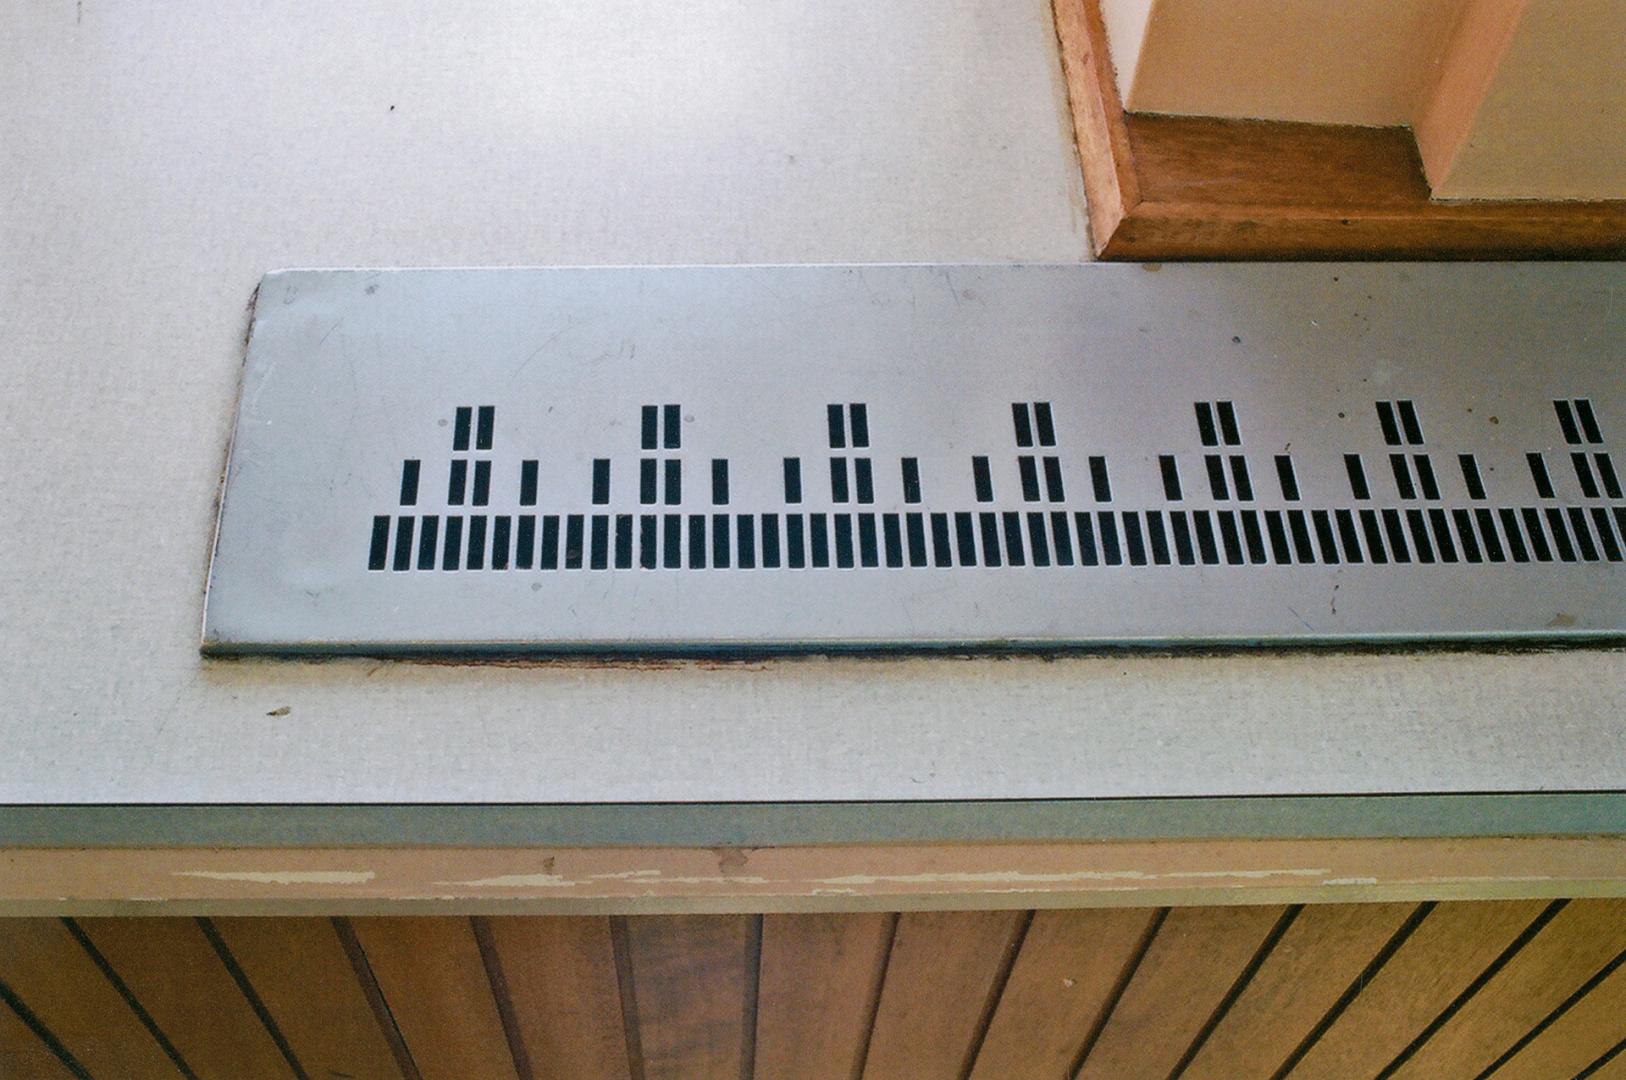 Detail of air vent with braille motif, activity room, Davisville P.S.